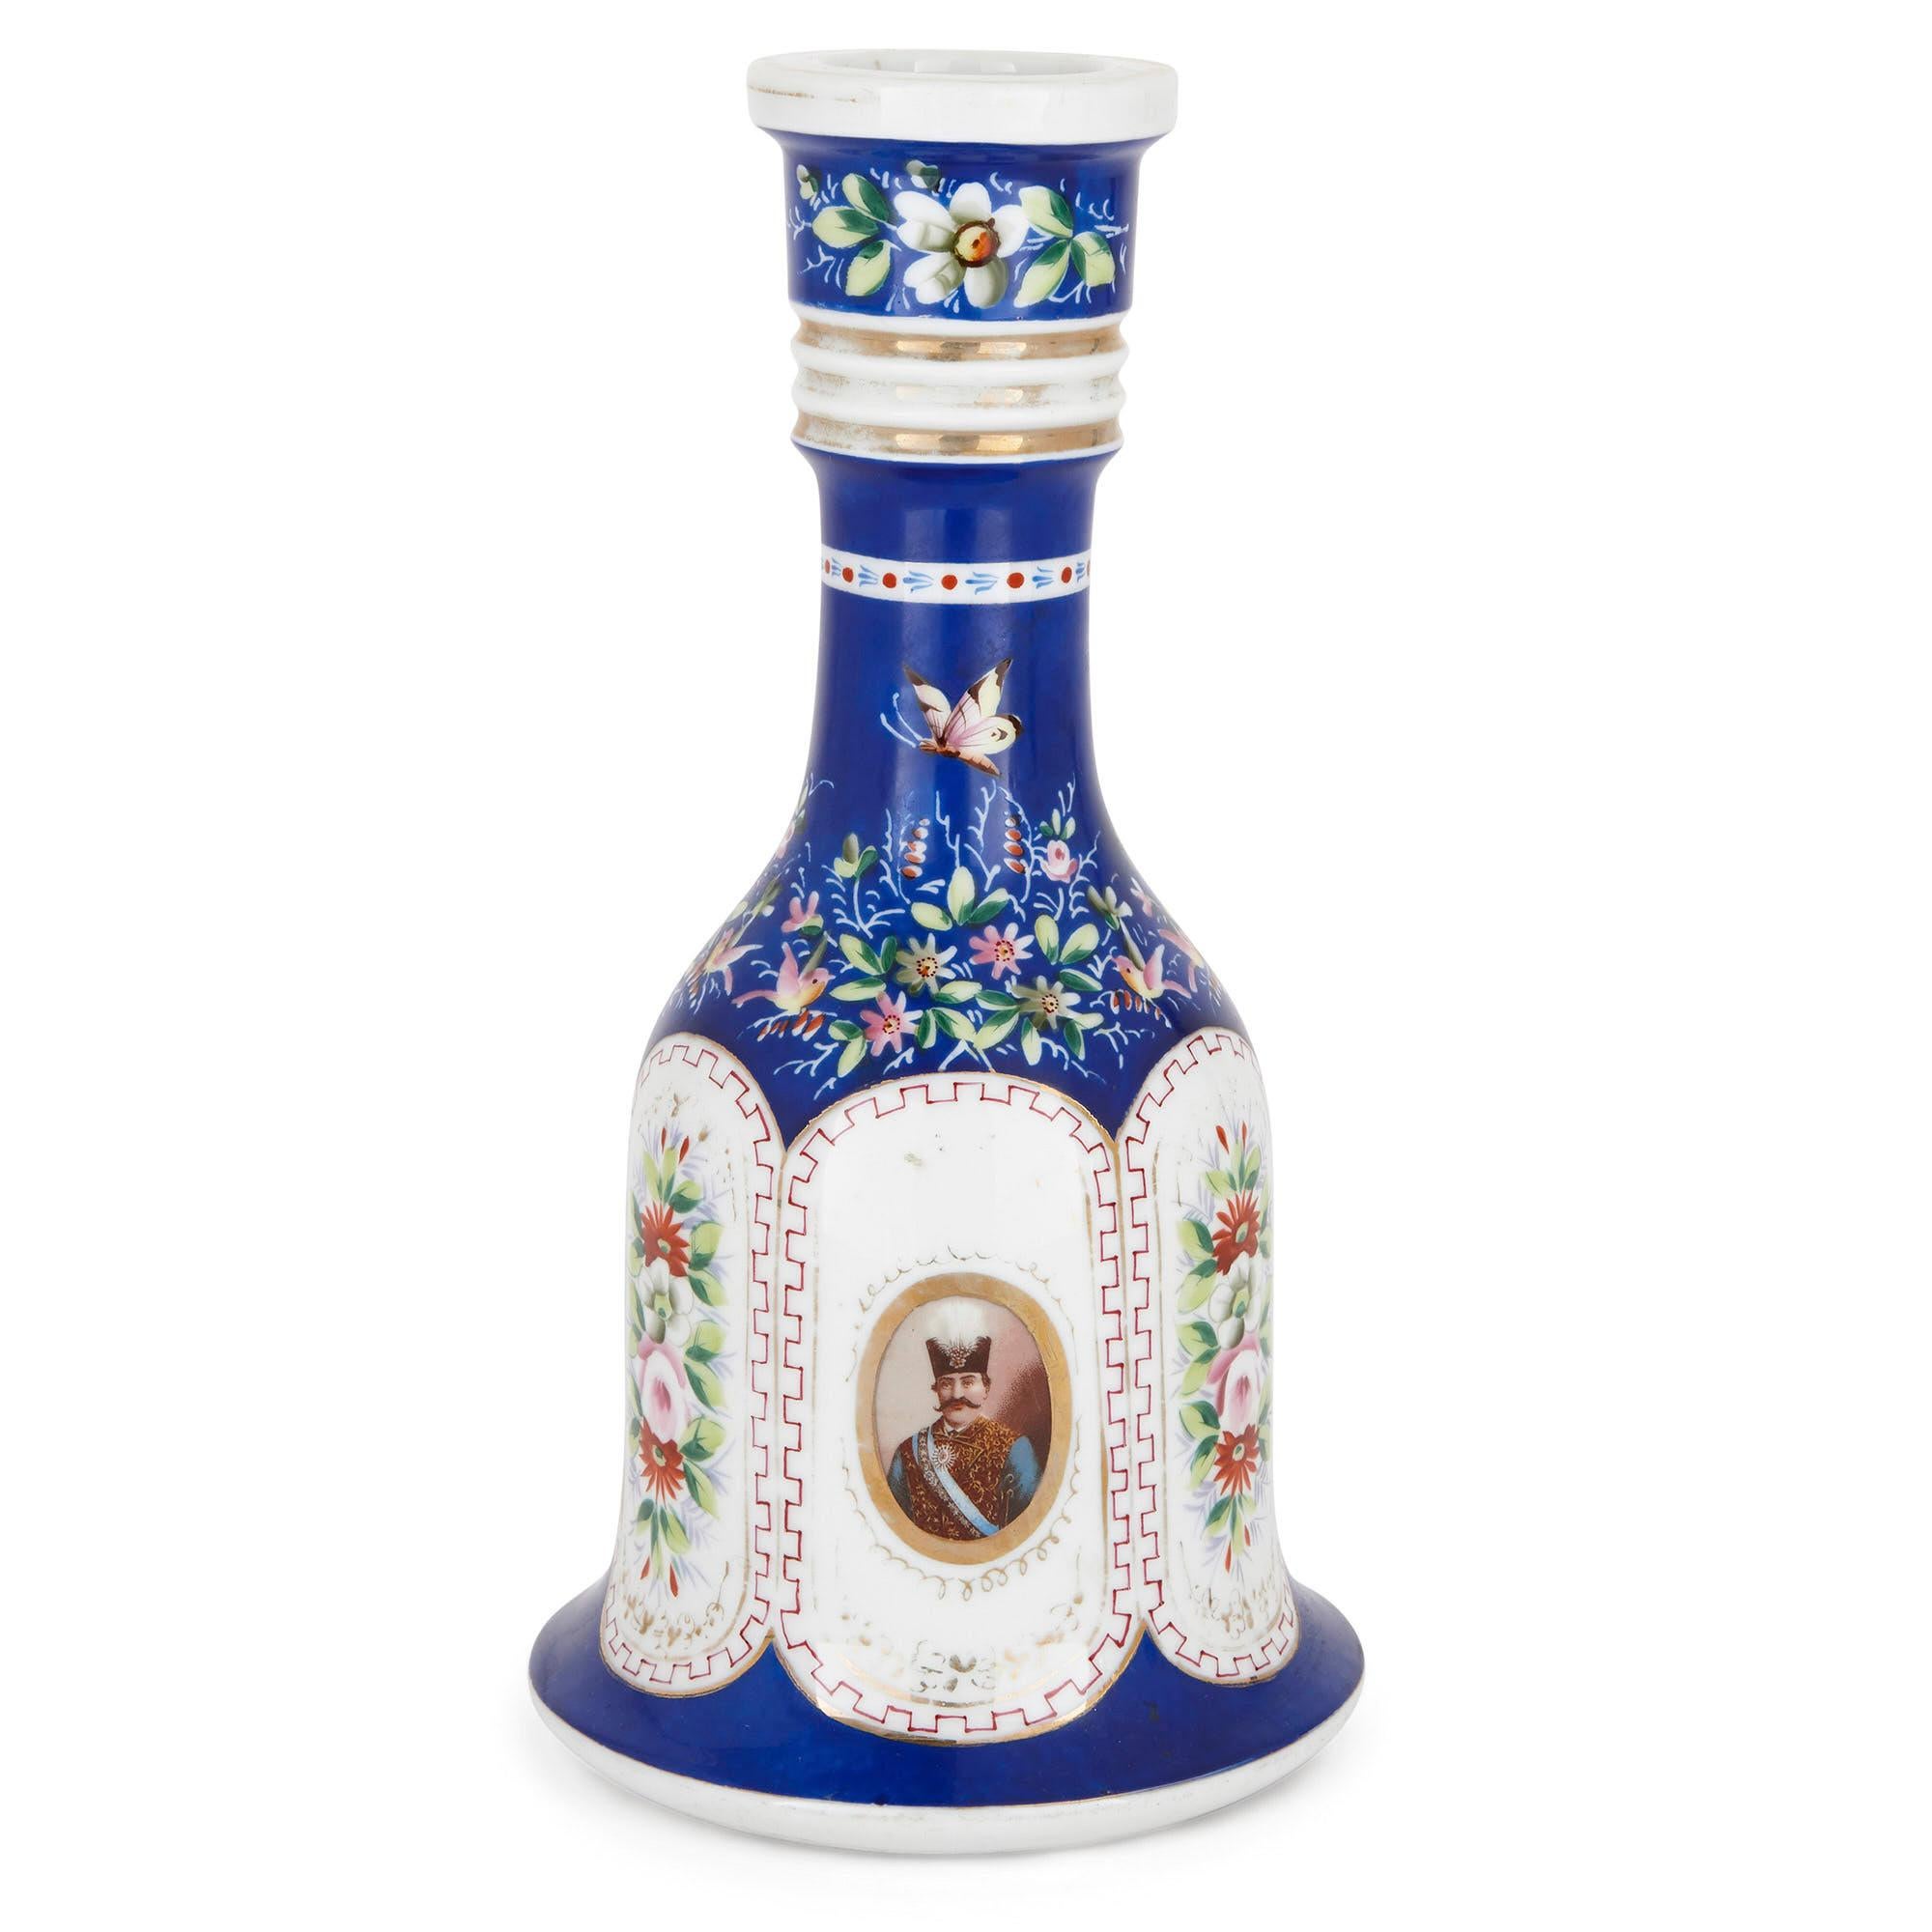 This beautifully crafted and decorated porcelain huqqa (or hookah) base is of Continental, possibly Russian origin. It was created in the late 19th century for the Persian market. 

The huqqa base features a bell-shaped body and a waisted neck